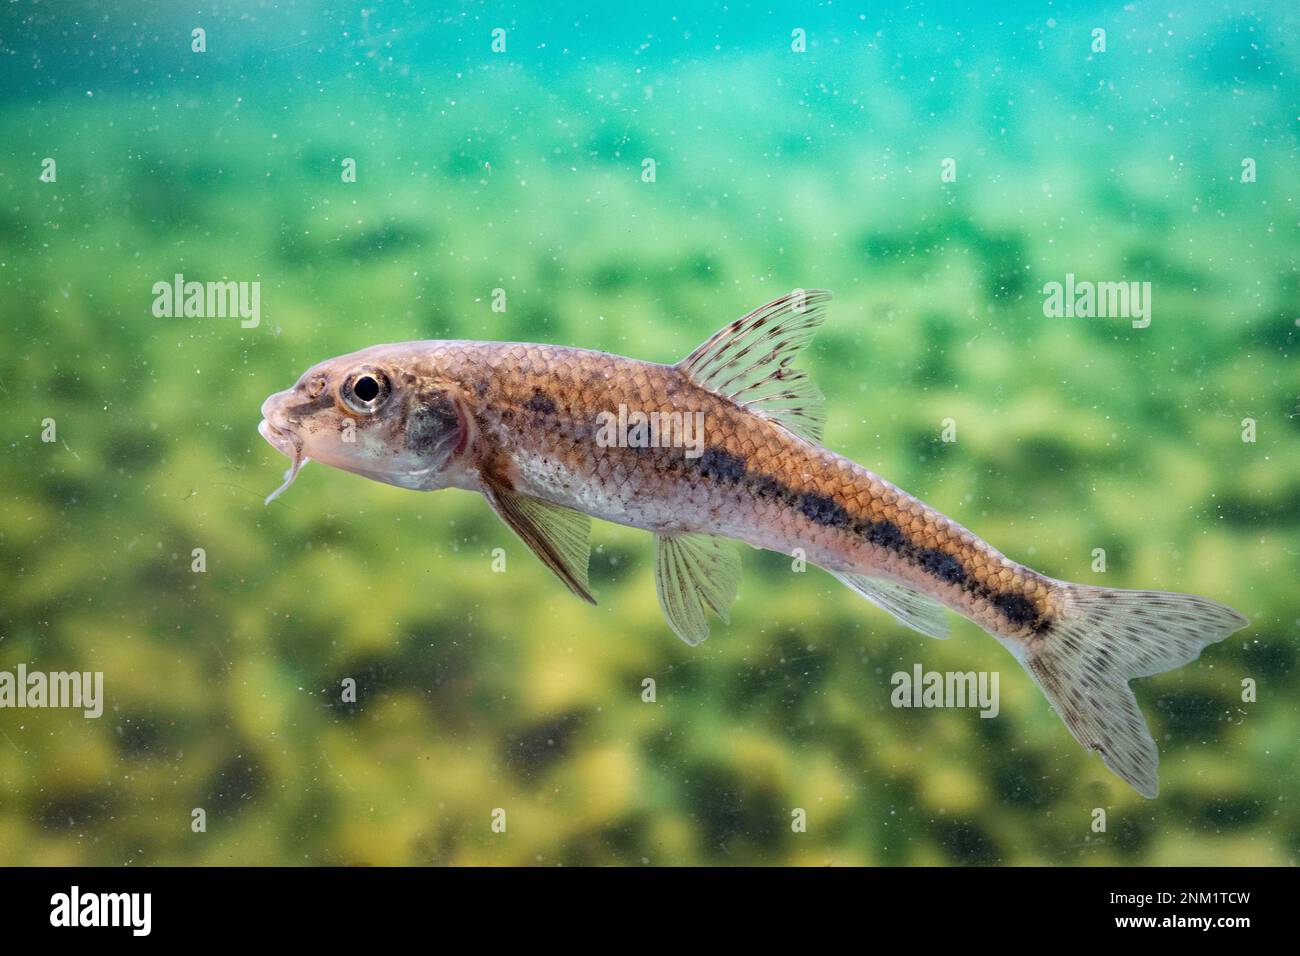 gudgeon swimming in midwater Stock Photo